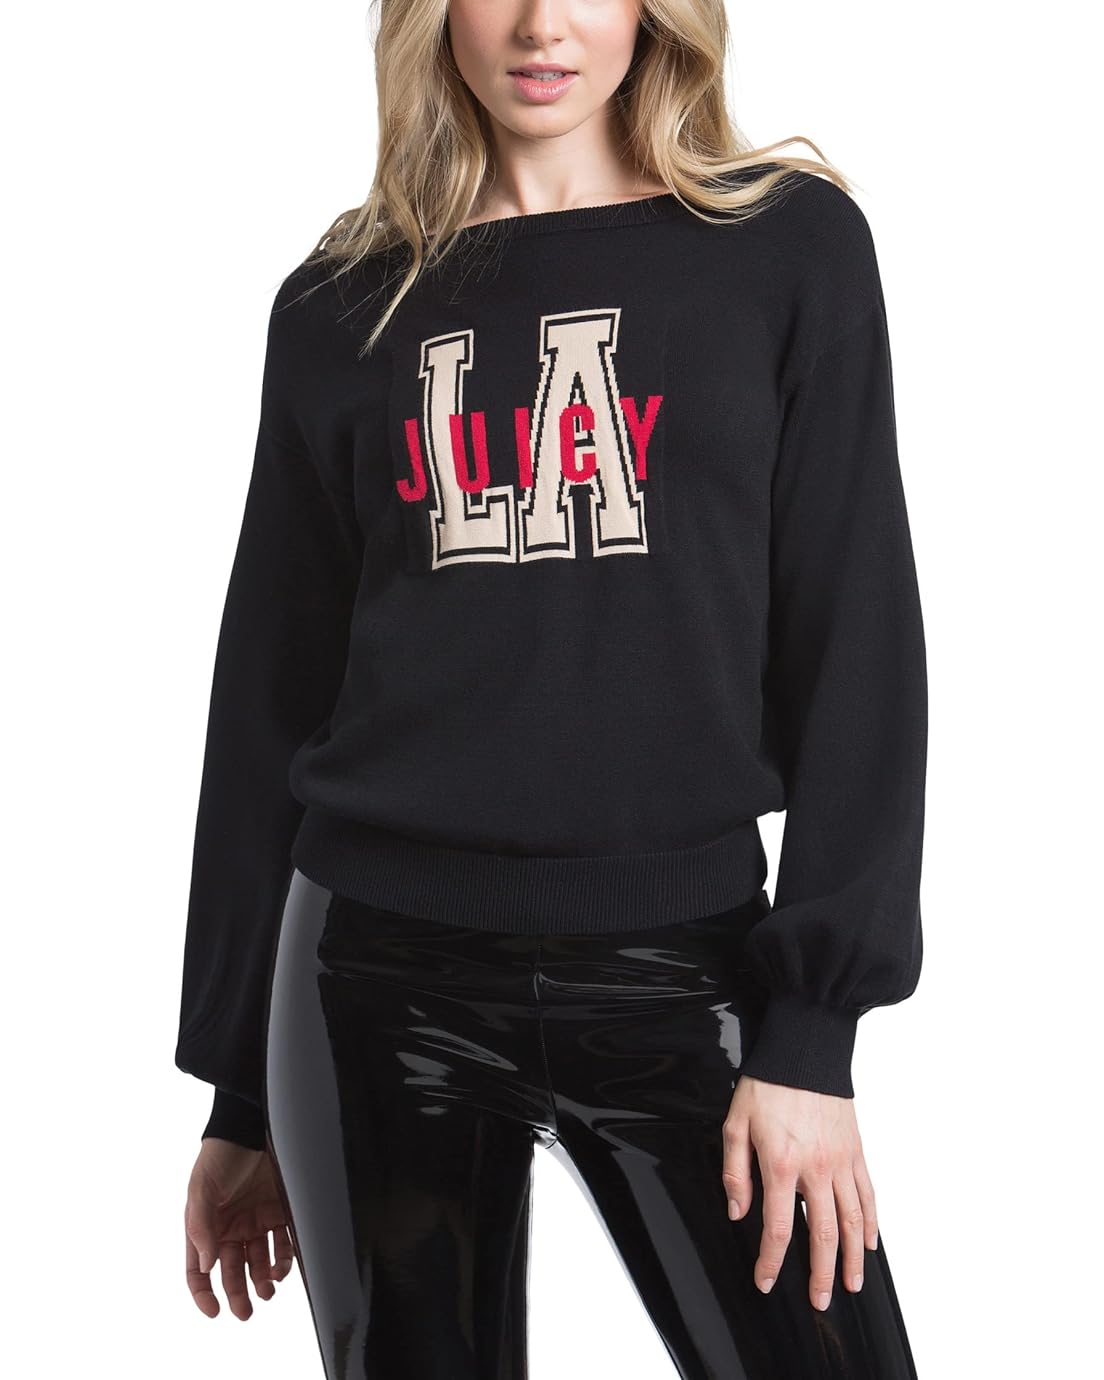 Juicy Couture Varsity Jacquard Pullover